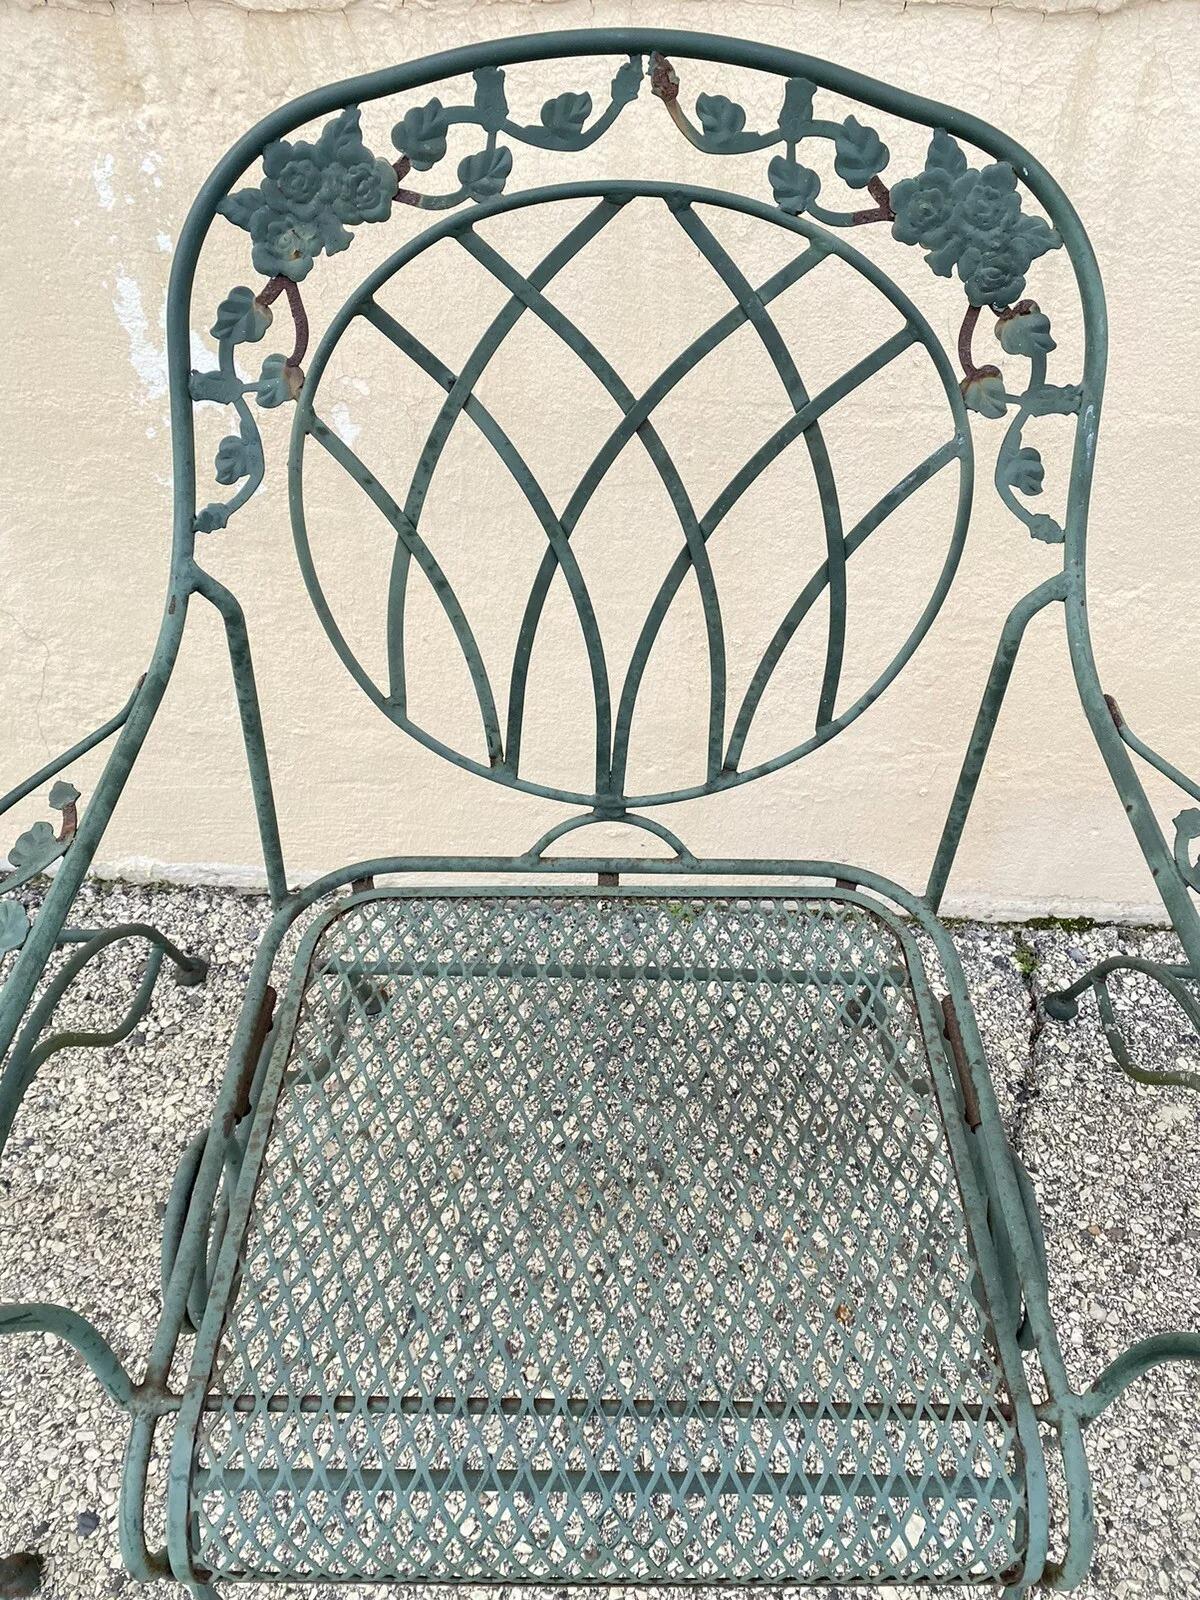 20th Century Wrought Iron Green Woodard Rose Style Garden Patio Springer Chairs - Set of 4 For Sale